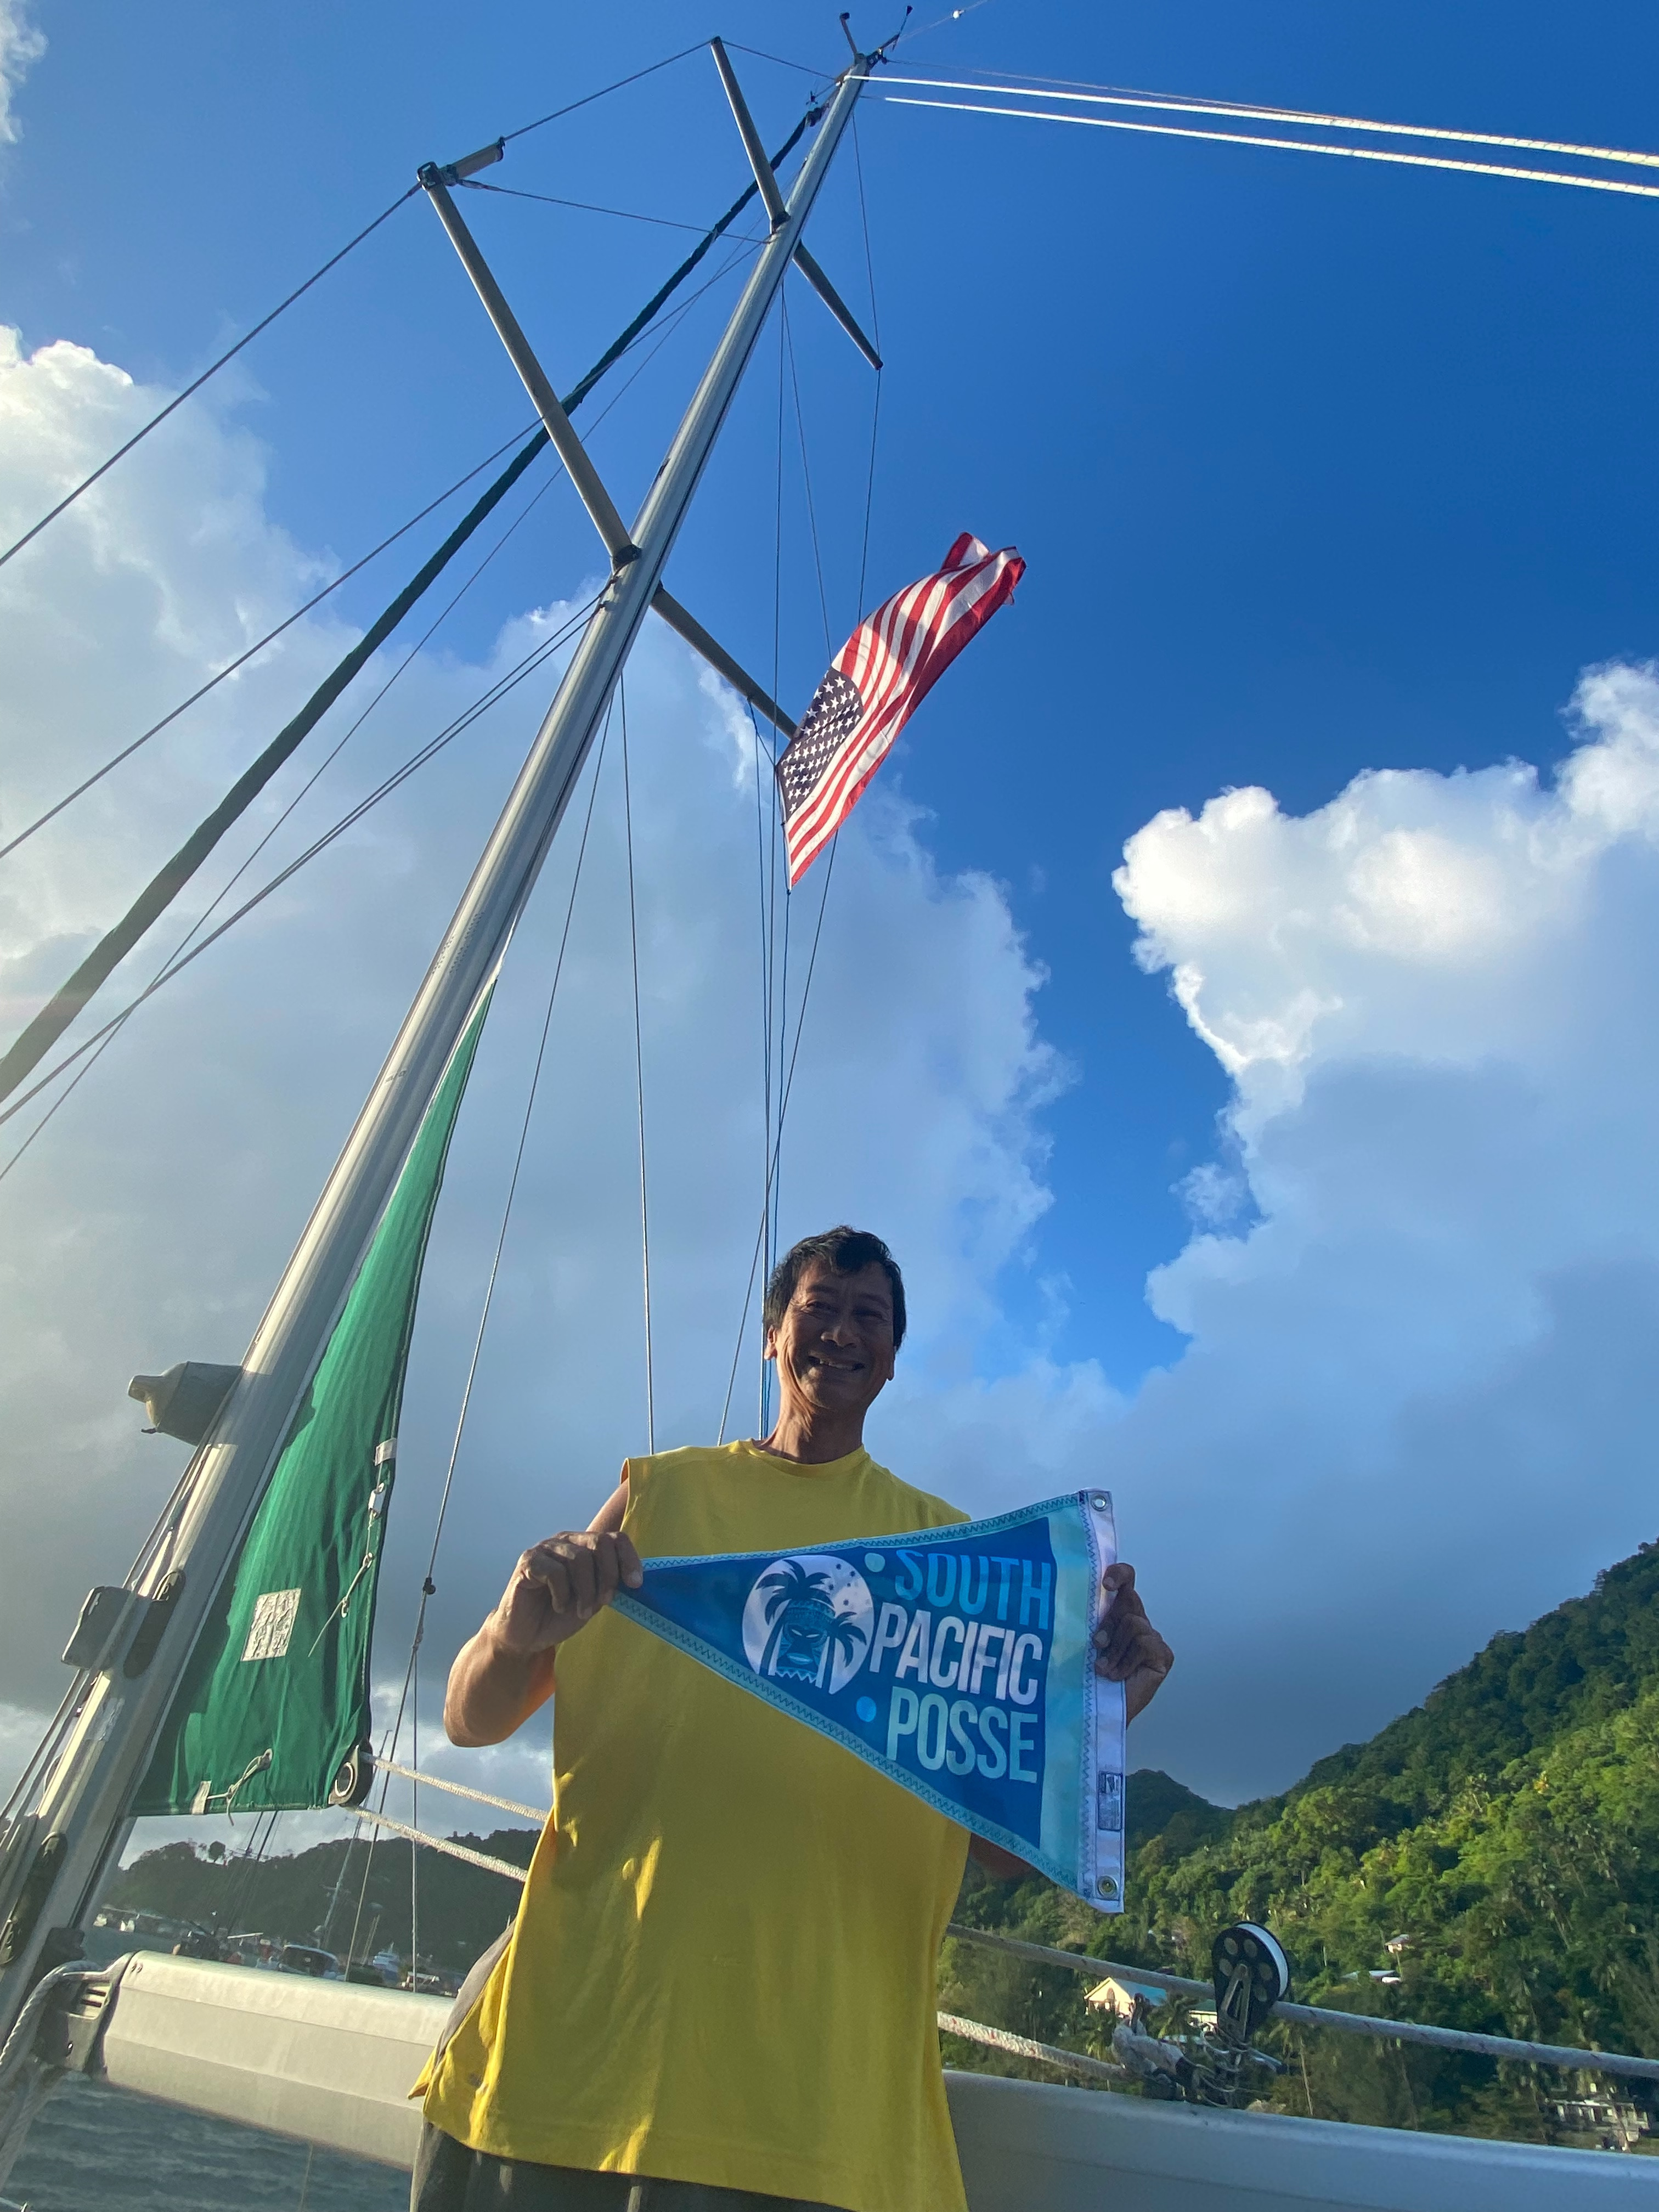 David Hoists the South Pacific Posse burgee in Pago  Pago